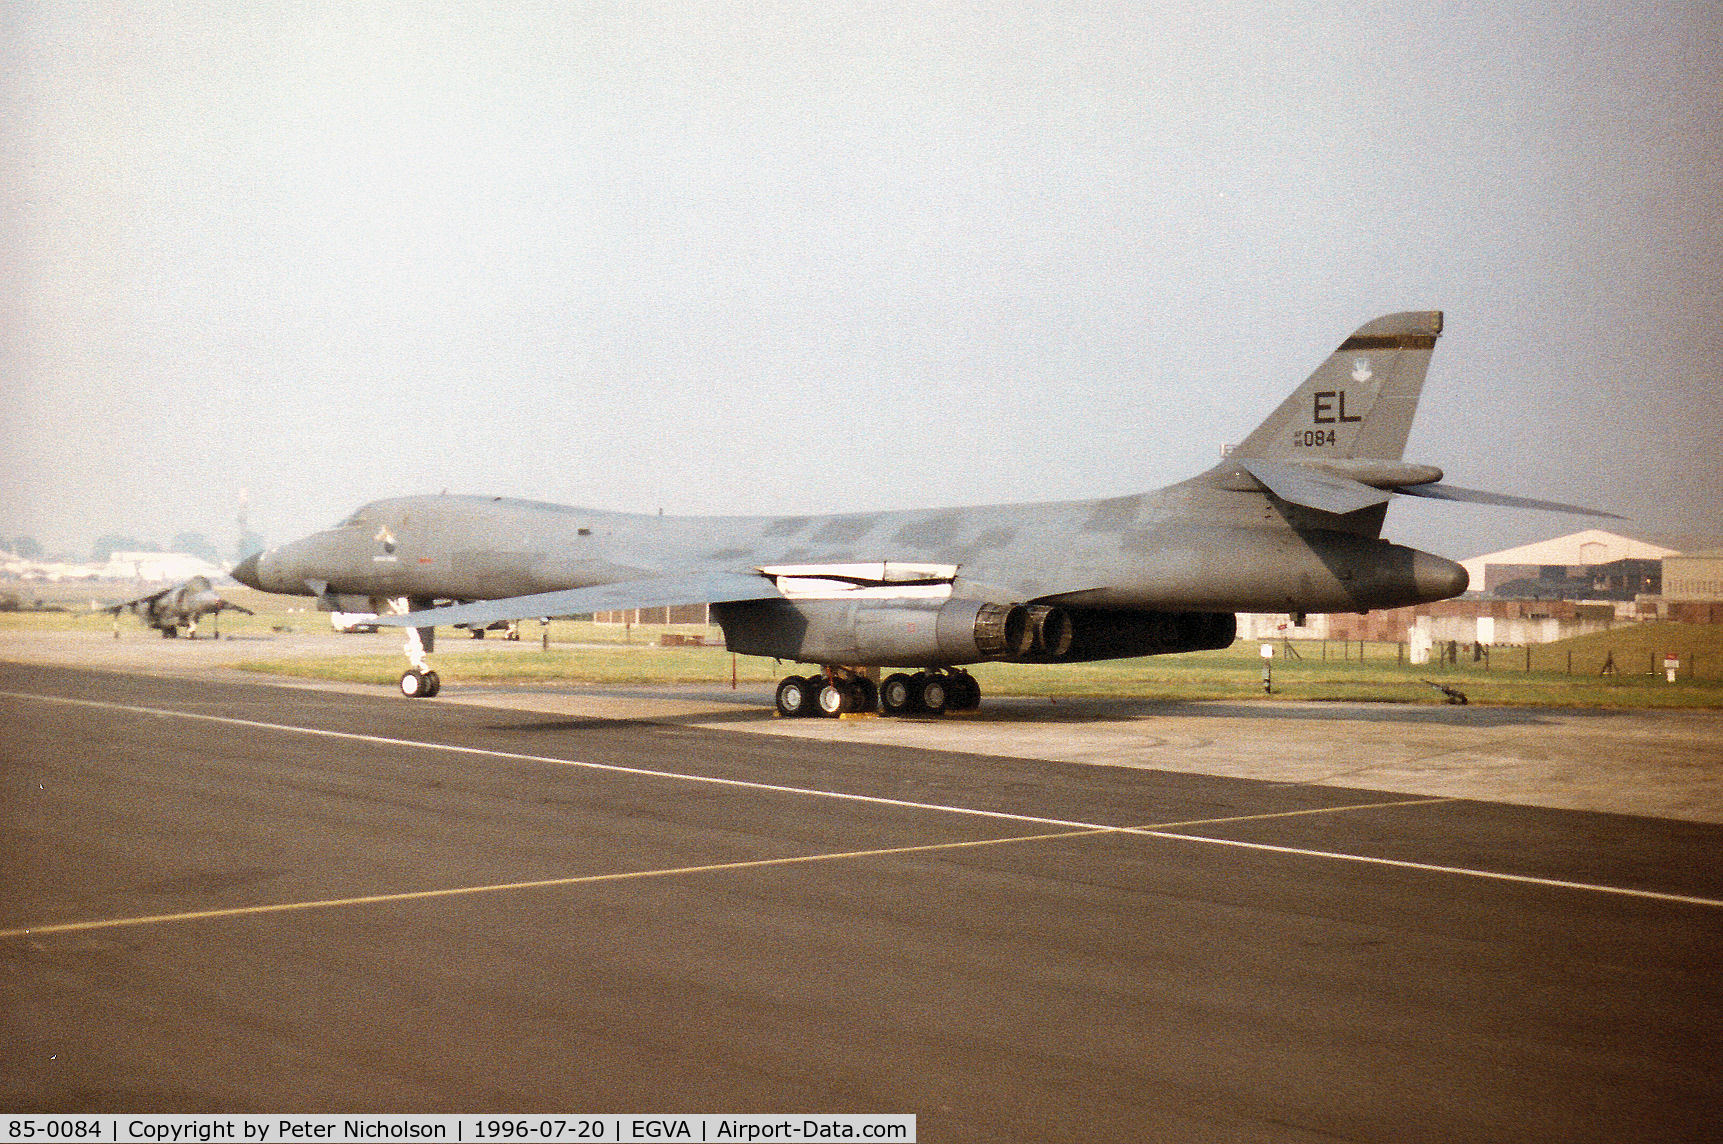 85-0084, 1985 Rockwell B-1B Lancer C/N 44, B-1B Lancer named Brute Force of the 37th Bomb Squadron/28th Bomb Wing at Ellsworth AFB on the flight-line at the 1996 Royal Intnl Air Tattoo at RAF Fairford.